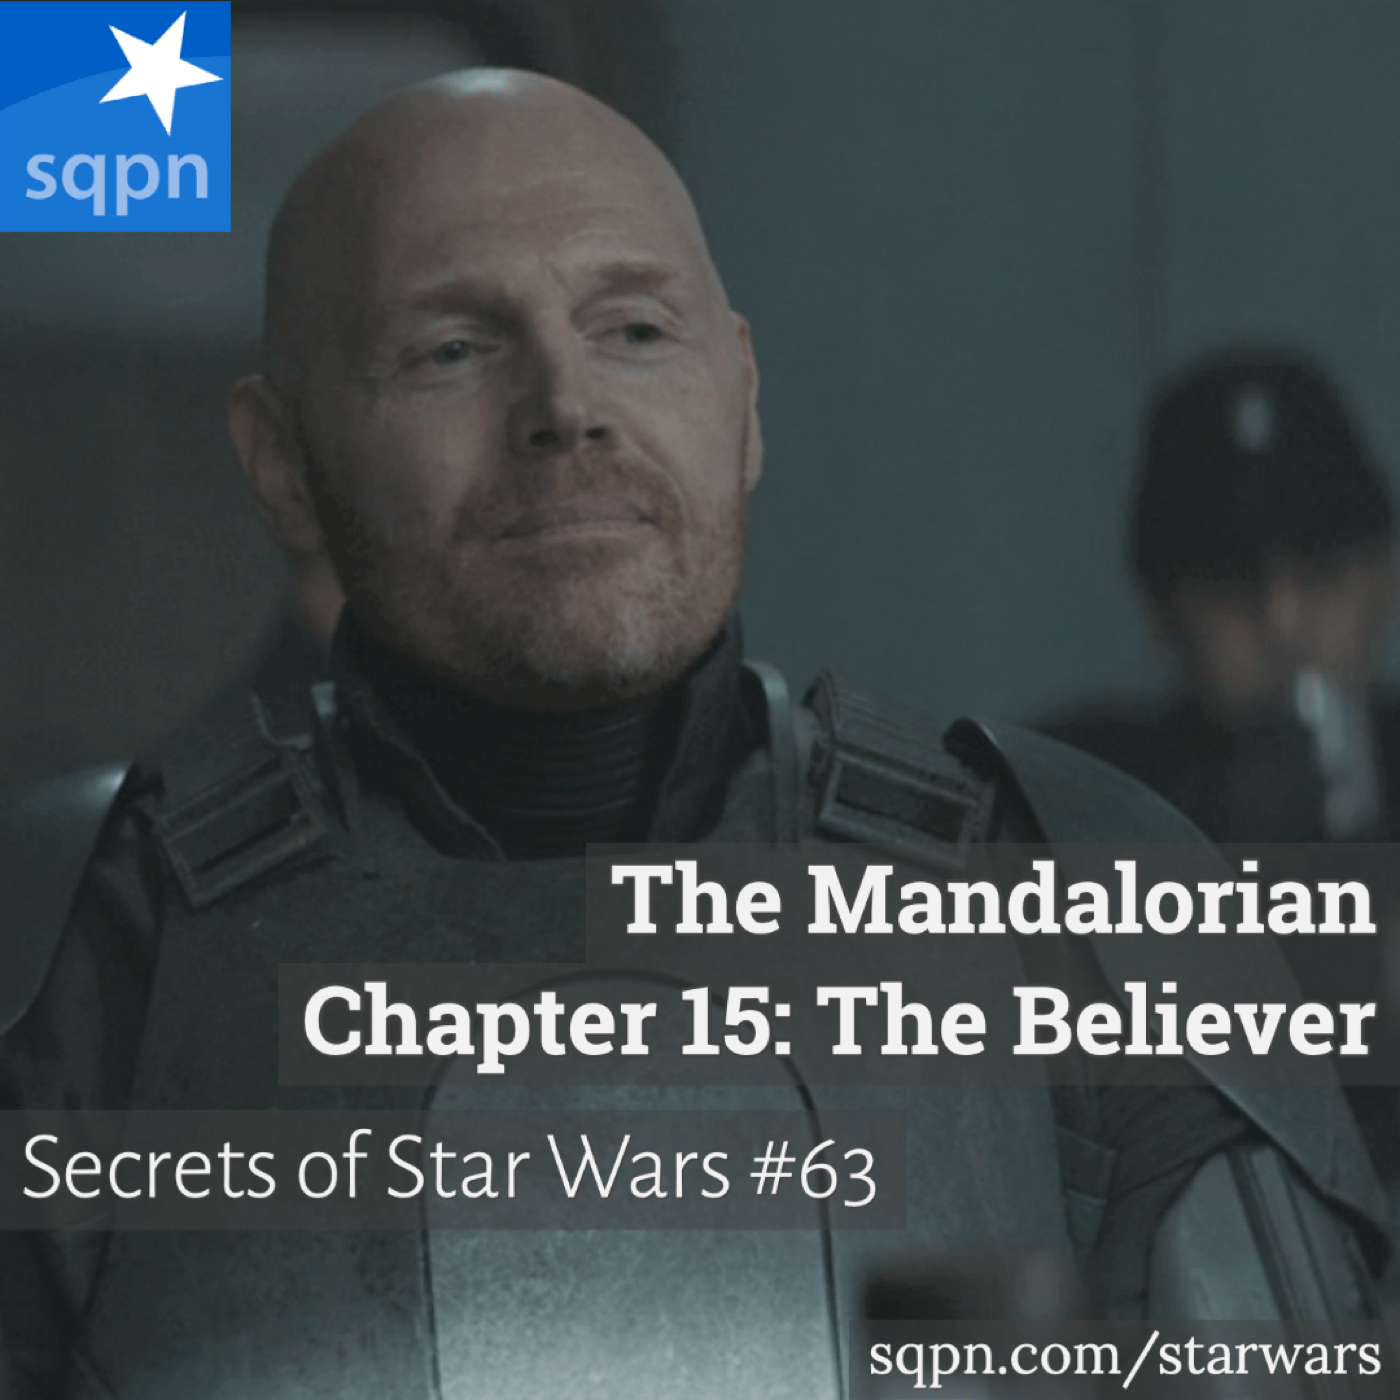 The Mandalorian, Ch. 15: The Believer